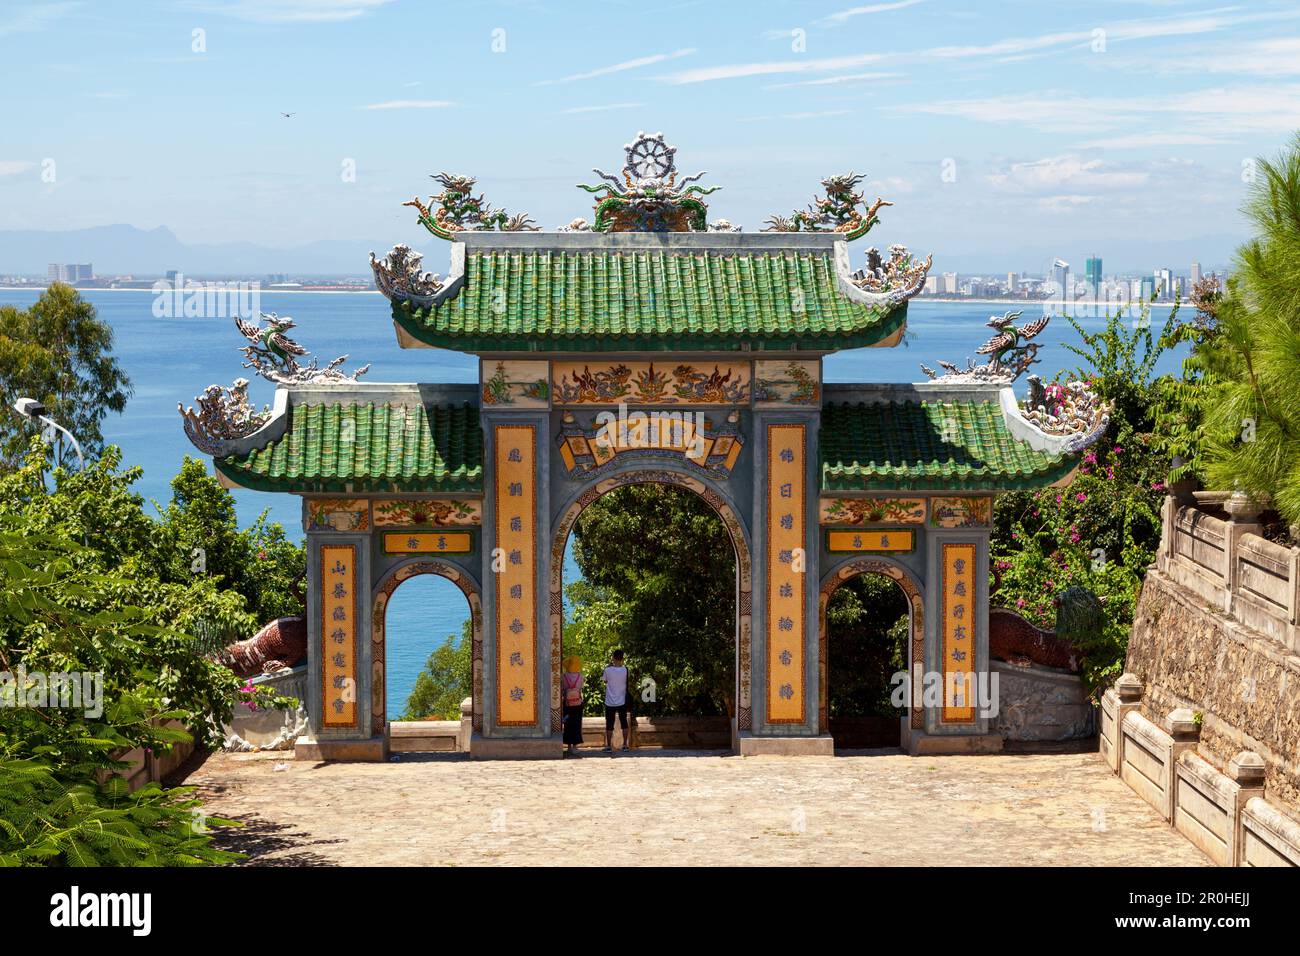 Da Nang, Vietnam - August 21 2018: Gate of the Linh Ung Pagoda atop of the Son Tra Mountain. Stock Photo